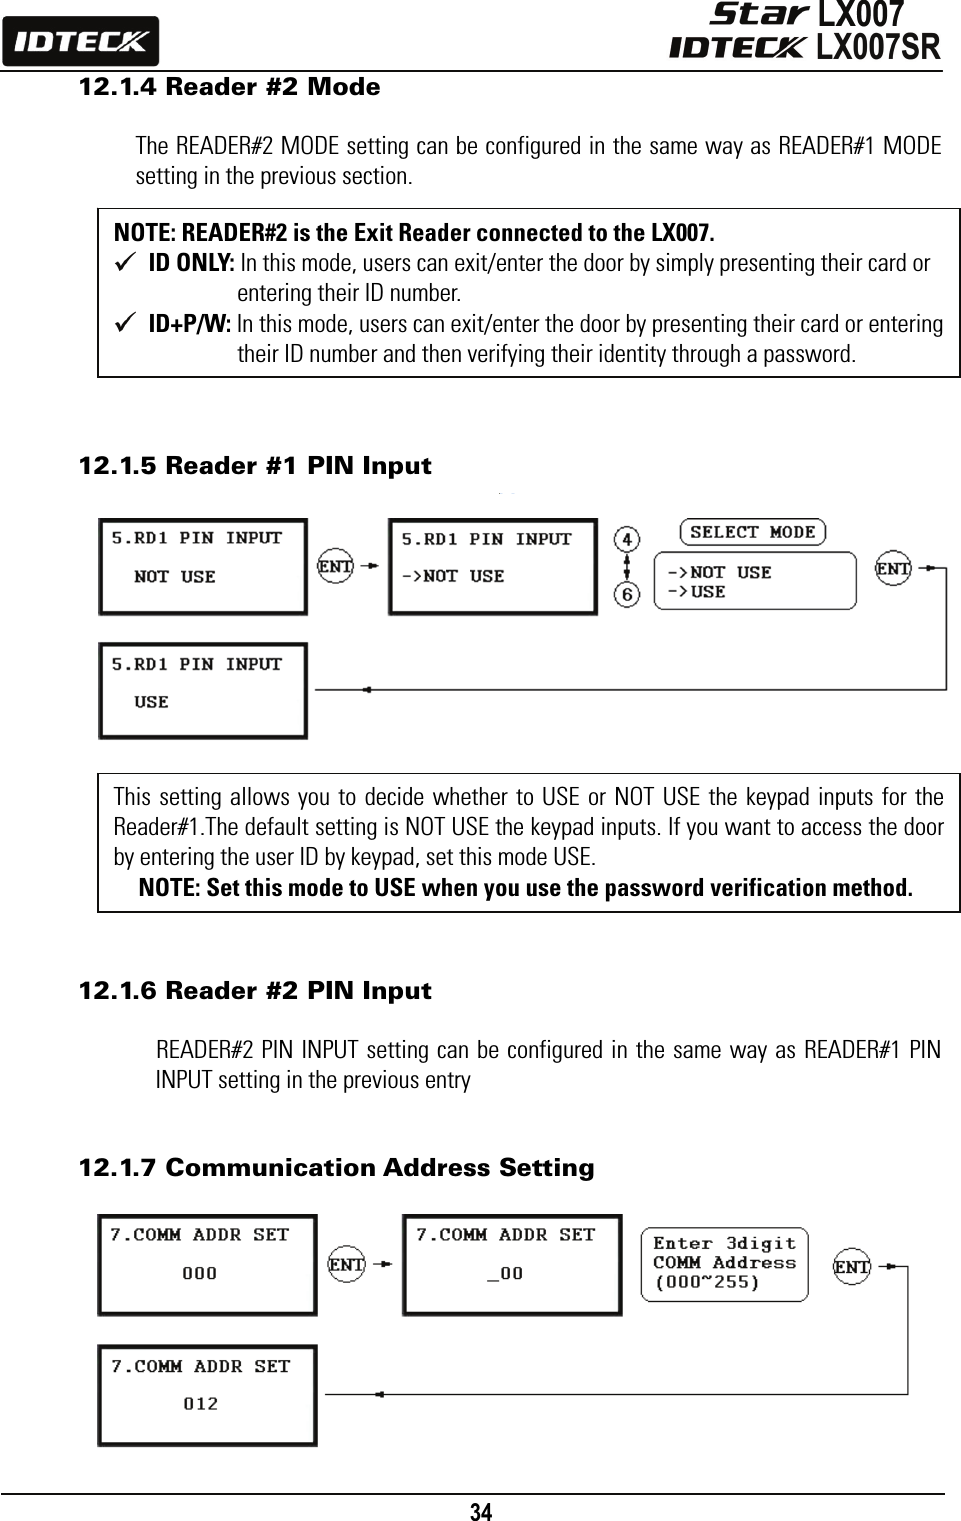                                                                                    34      12.1.4 Reader #2 Mode  The READER#2 MODE setting can be configured in the same way as READER#1 MODE setting in the previous section.          12.1.5 Reader #1 PIN Input                 12.1.6 Reader #2 PIN Input  READER#2 PIN INPUT setting can be configured in the same way as READER#1 PIN INPUT setting in the previous entry   12.1.7 Communication Address Setting           This setting allows you to decide whether to USE or NOT USE the keypad inputs for the Reader#1.The default setting is NOT USE the keypad inputs. If you want to access the door by entering the user ID by keypad, set this mode USE. NOTE: Set this mode to USE when you use the password verification method. NOTE: READER#2 is the Exit Reader connected to the LX007.  ID ONLY: In this mode, users can exit/enter the door by simply presenting their card or entering their ID number.  ID+P/W: In this mode, users can exit/enter the door by presenting their card or entering their ID number and then verifying their identity through a password. 